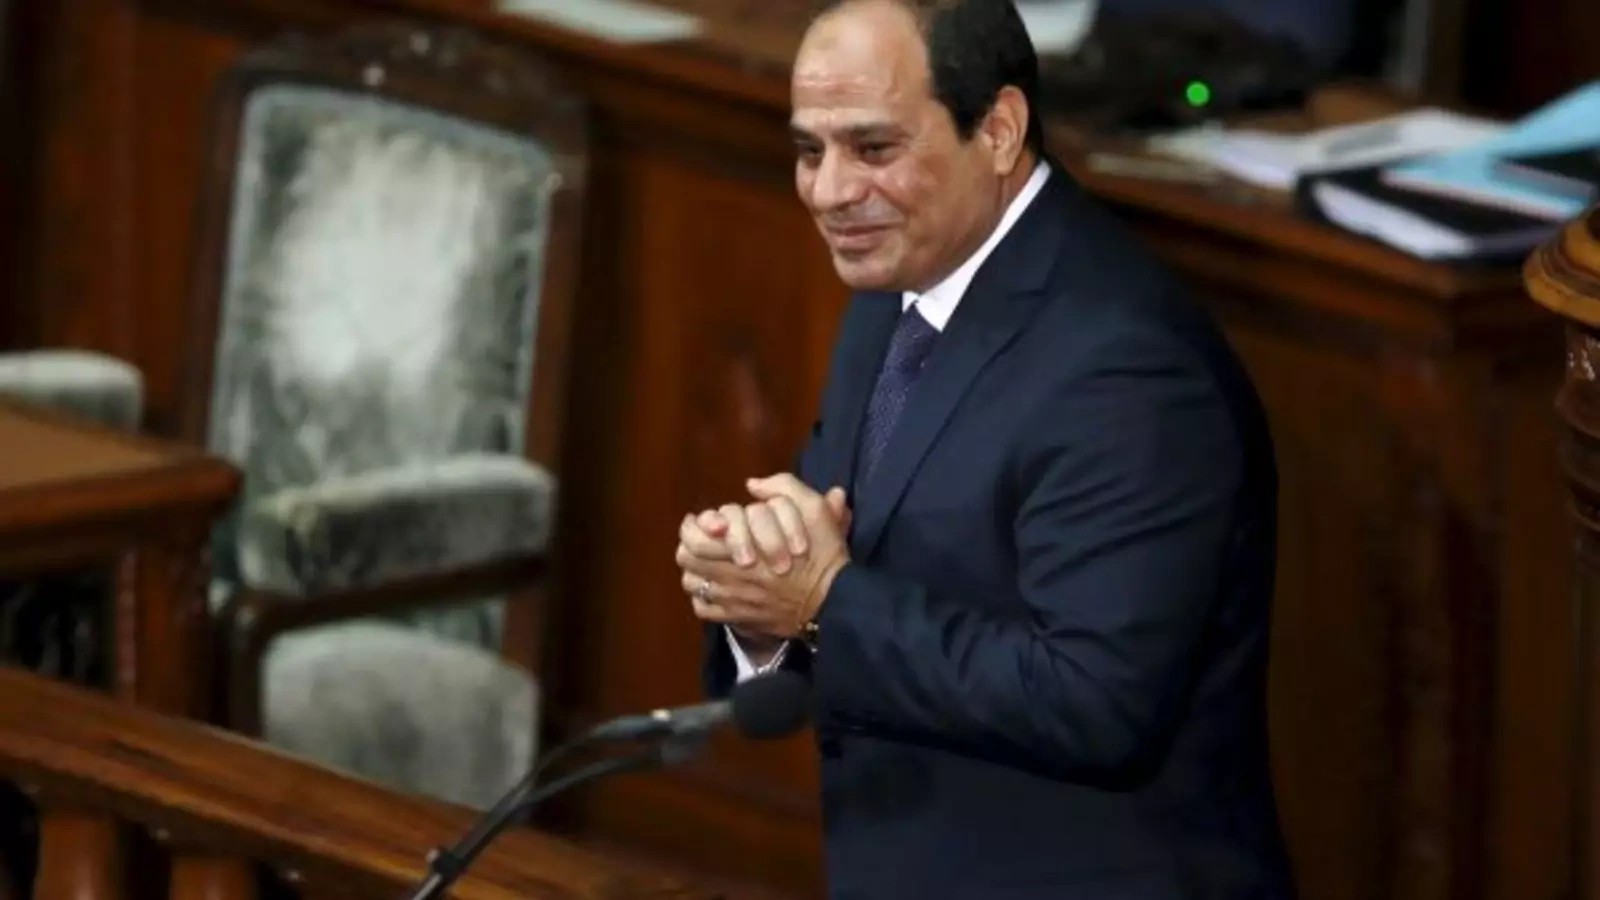 Egypt's President Abdel Fattah al-Sisi reacts after delivering a speech at the Lower House of parliament in Tokyo, Japan, February 29, 2016.